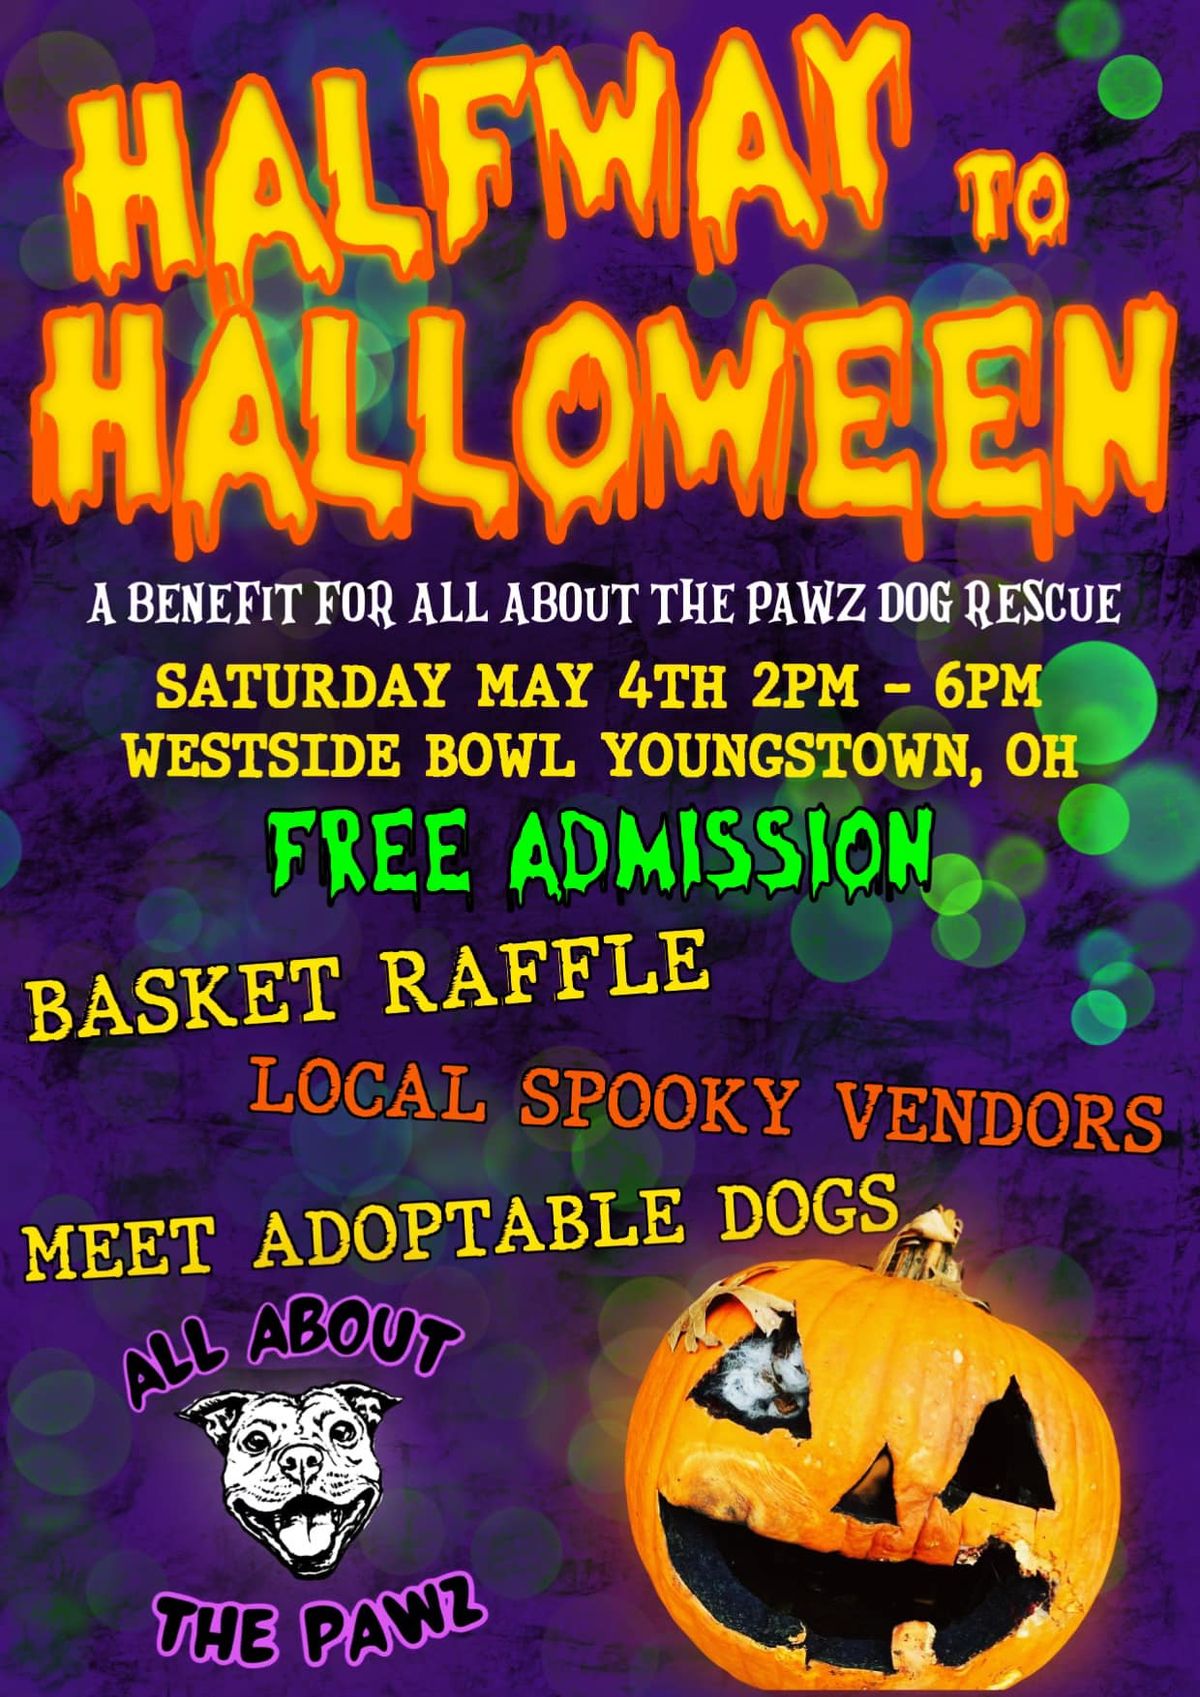 Halfway to Halloween vendor market at the Westside Bowl (a benefit for All About the PAWZ)